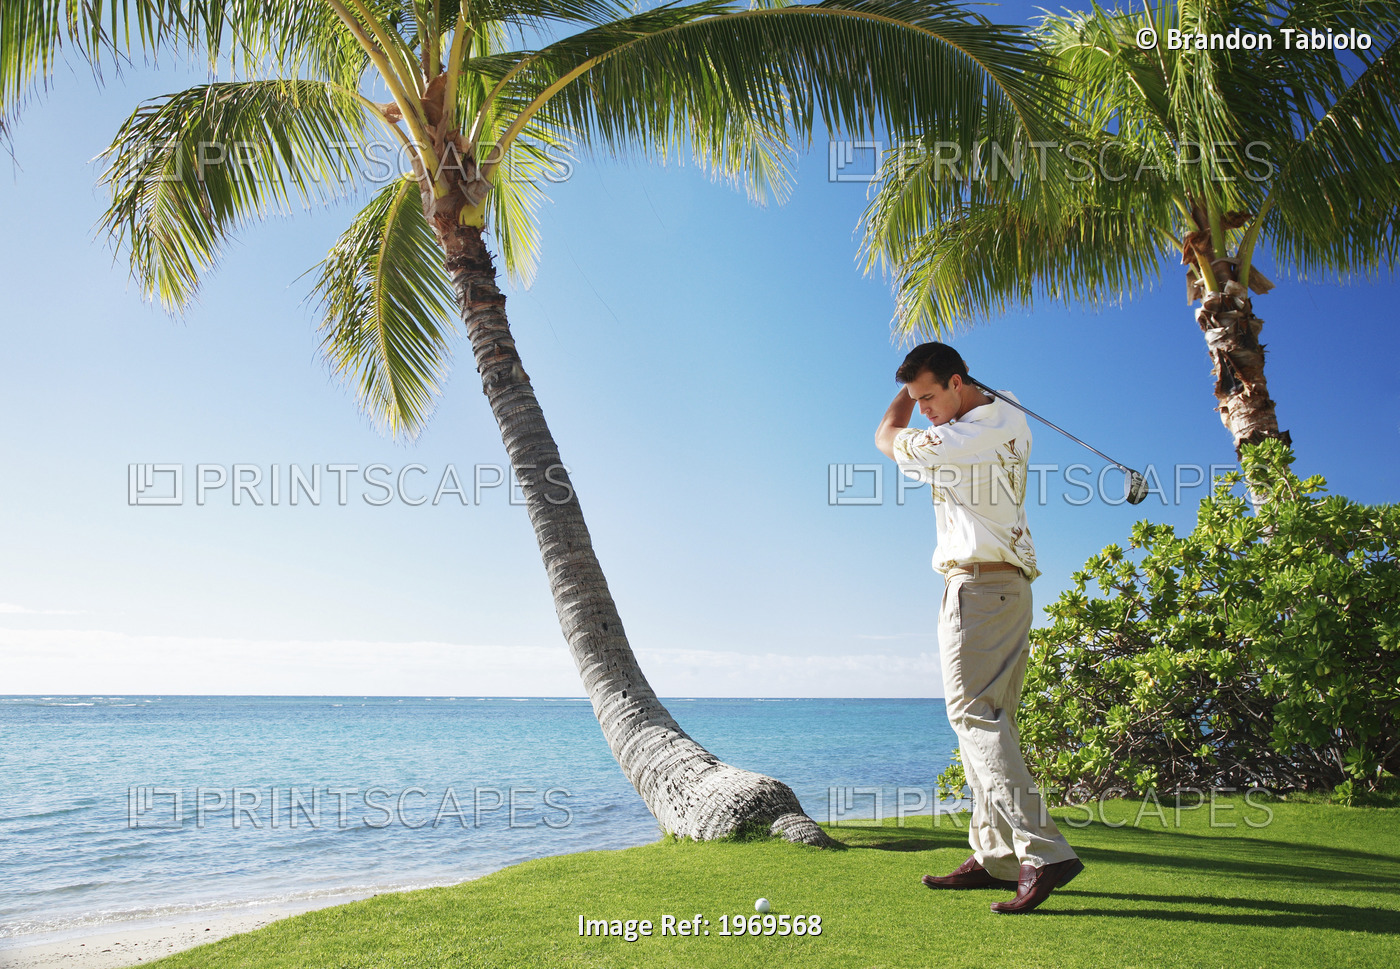 Hawaii, Oahu, Male Playing Golf, Ready To Swing His Golf Club At A Beach Front ...